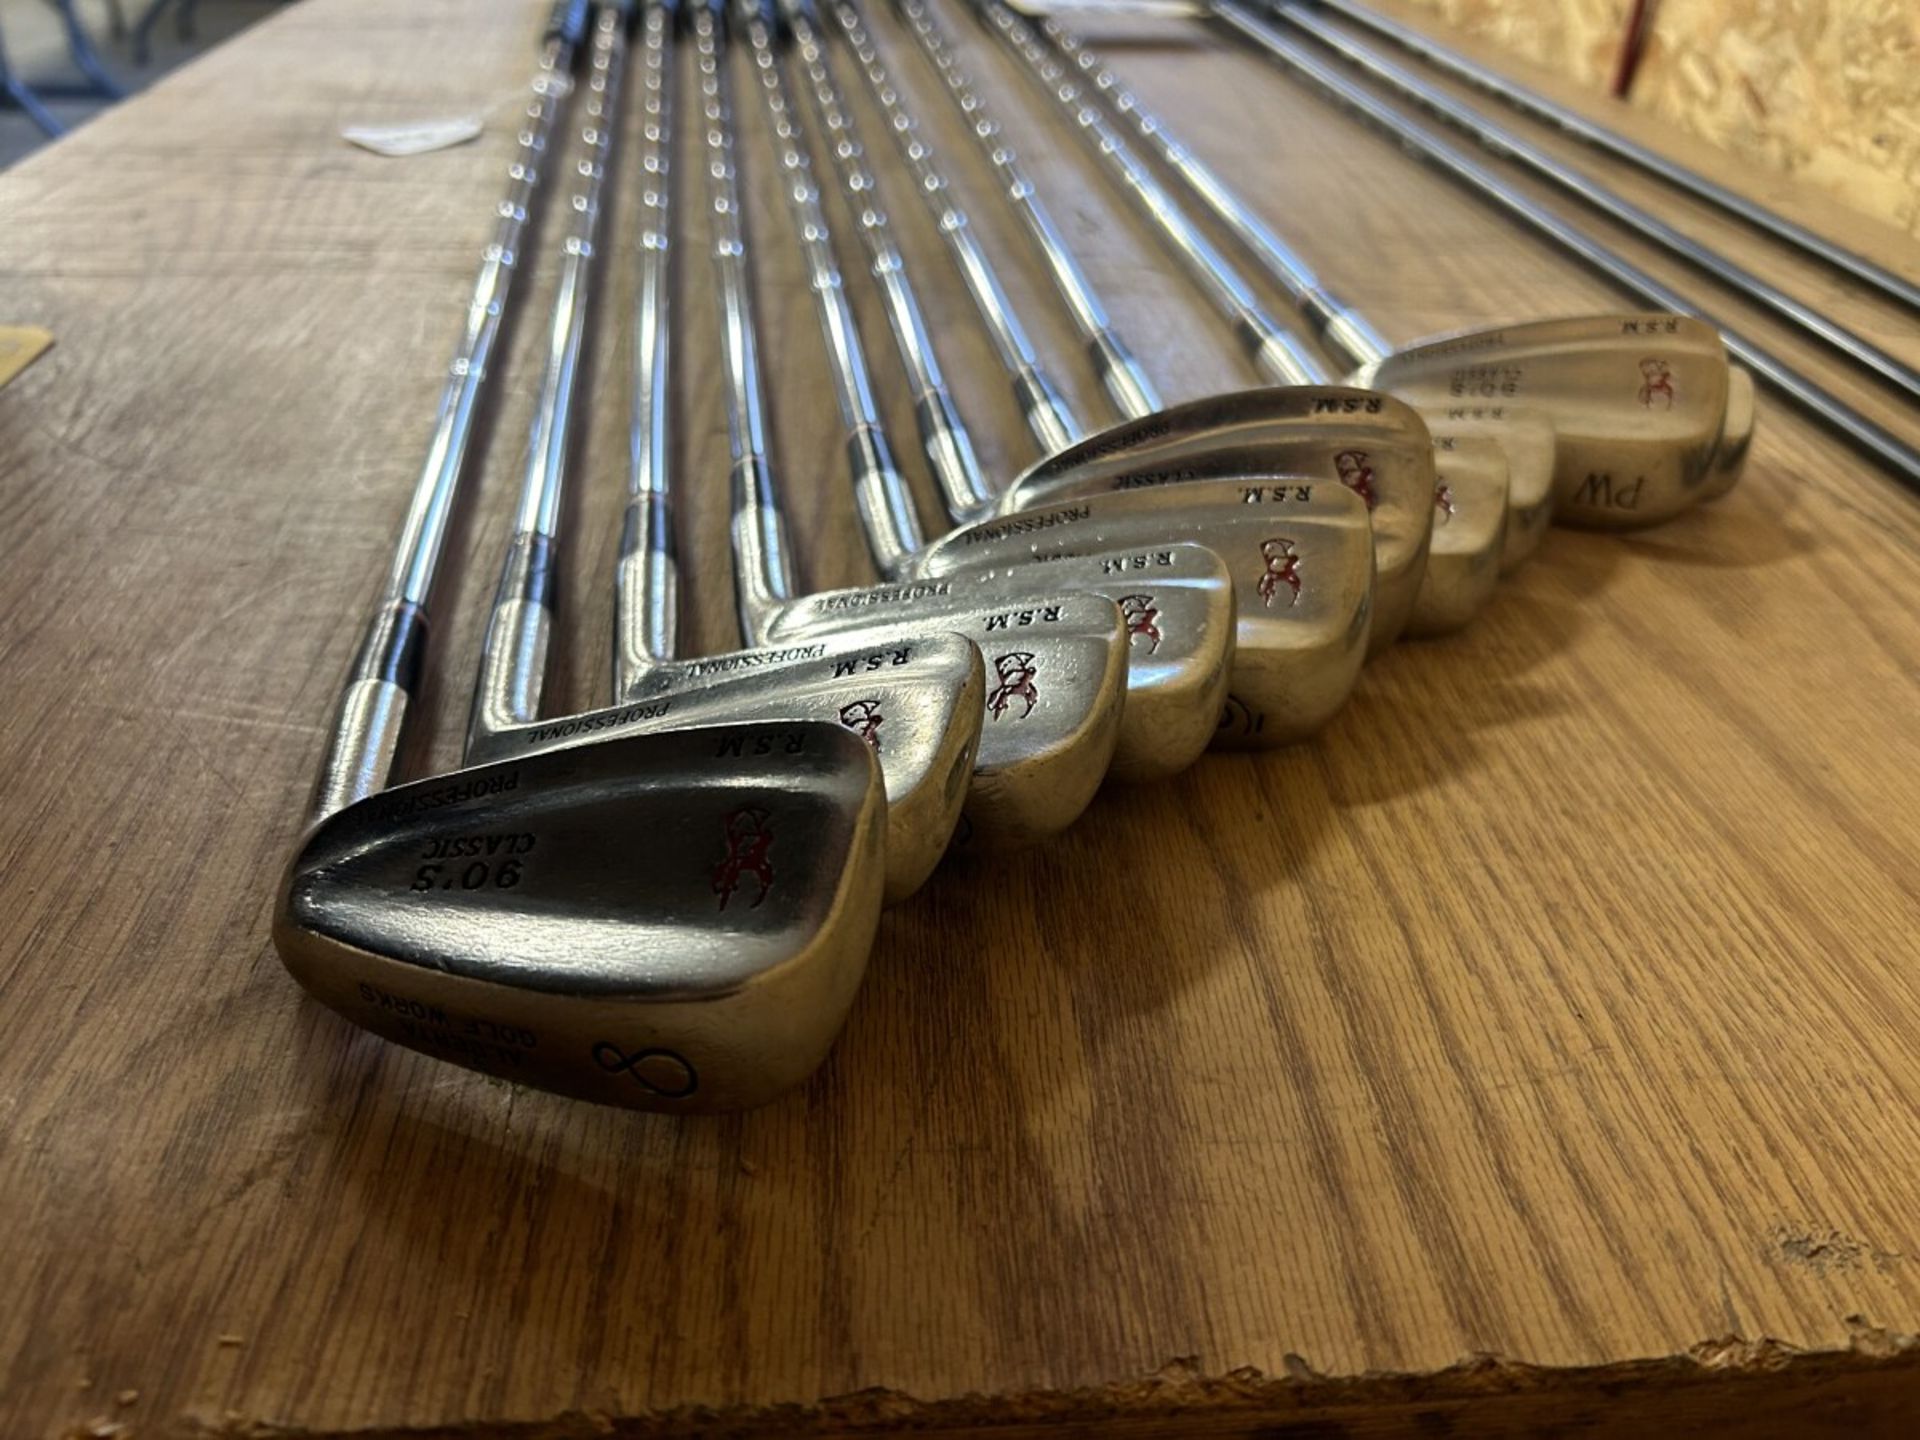 RH GOLF CLUBS NICKENT GENEX IRONWOOD IRONS AND IRON WOOD CLUBS - A20 - Image 4 of 8